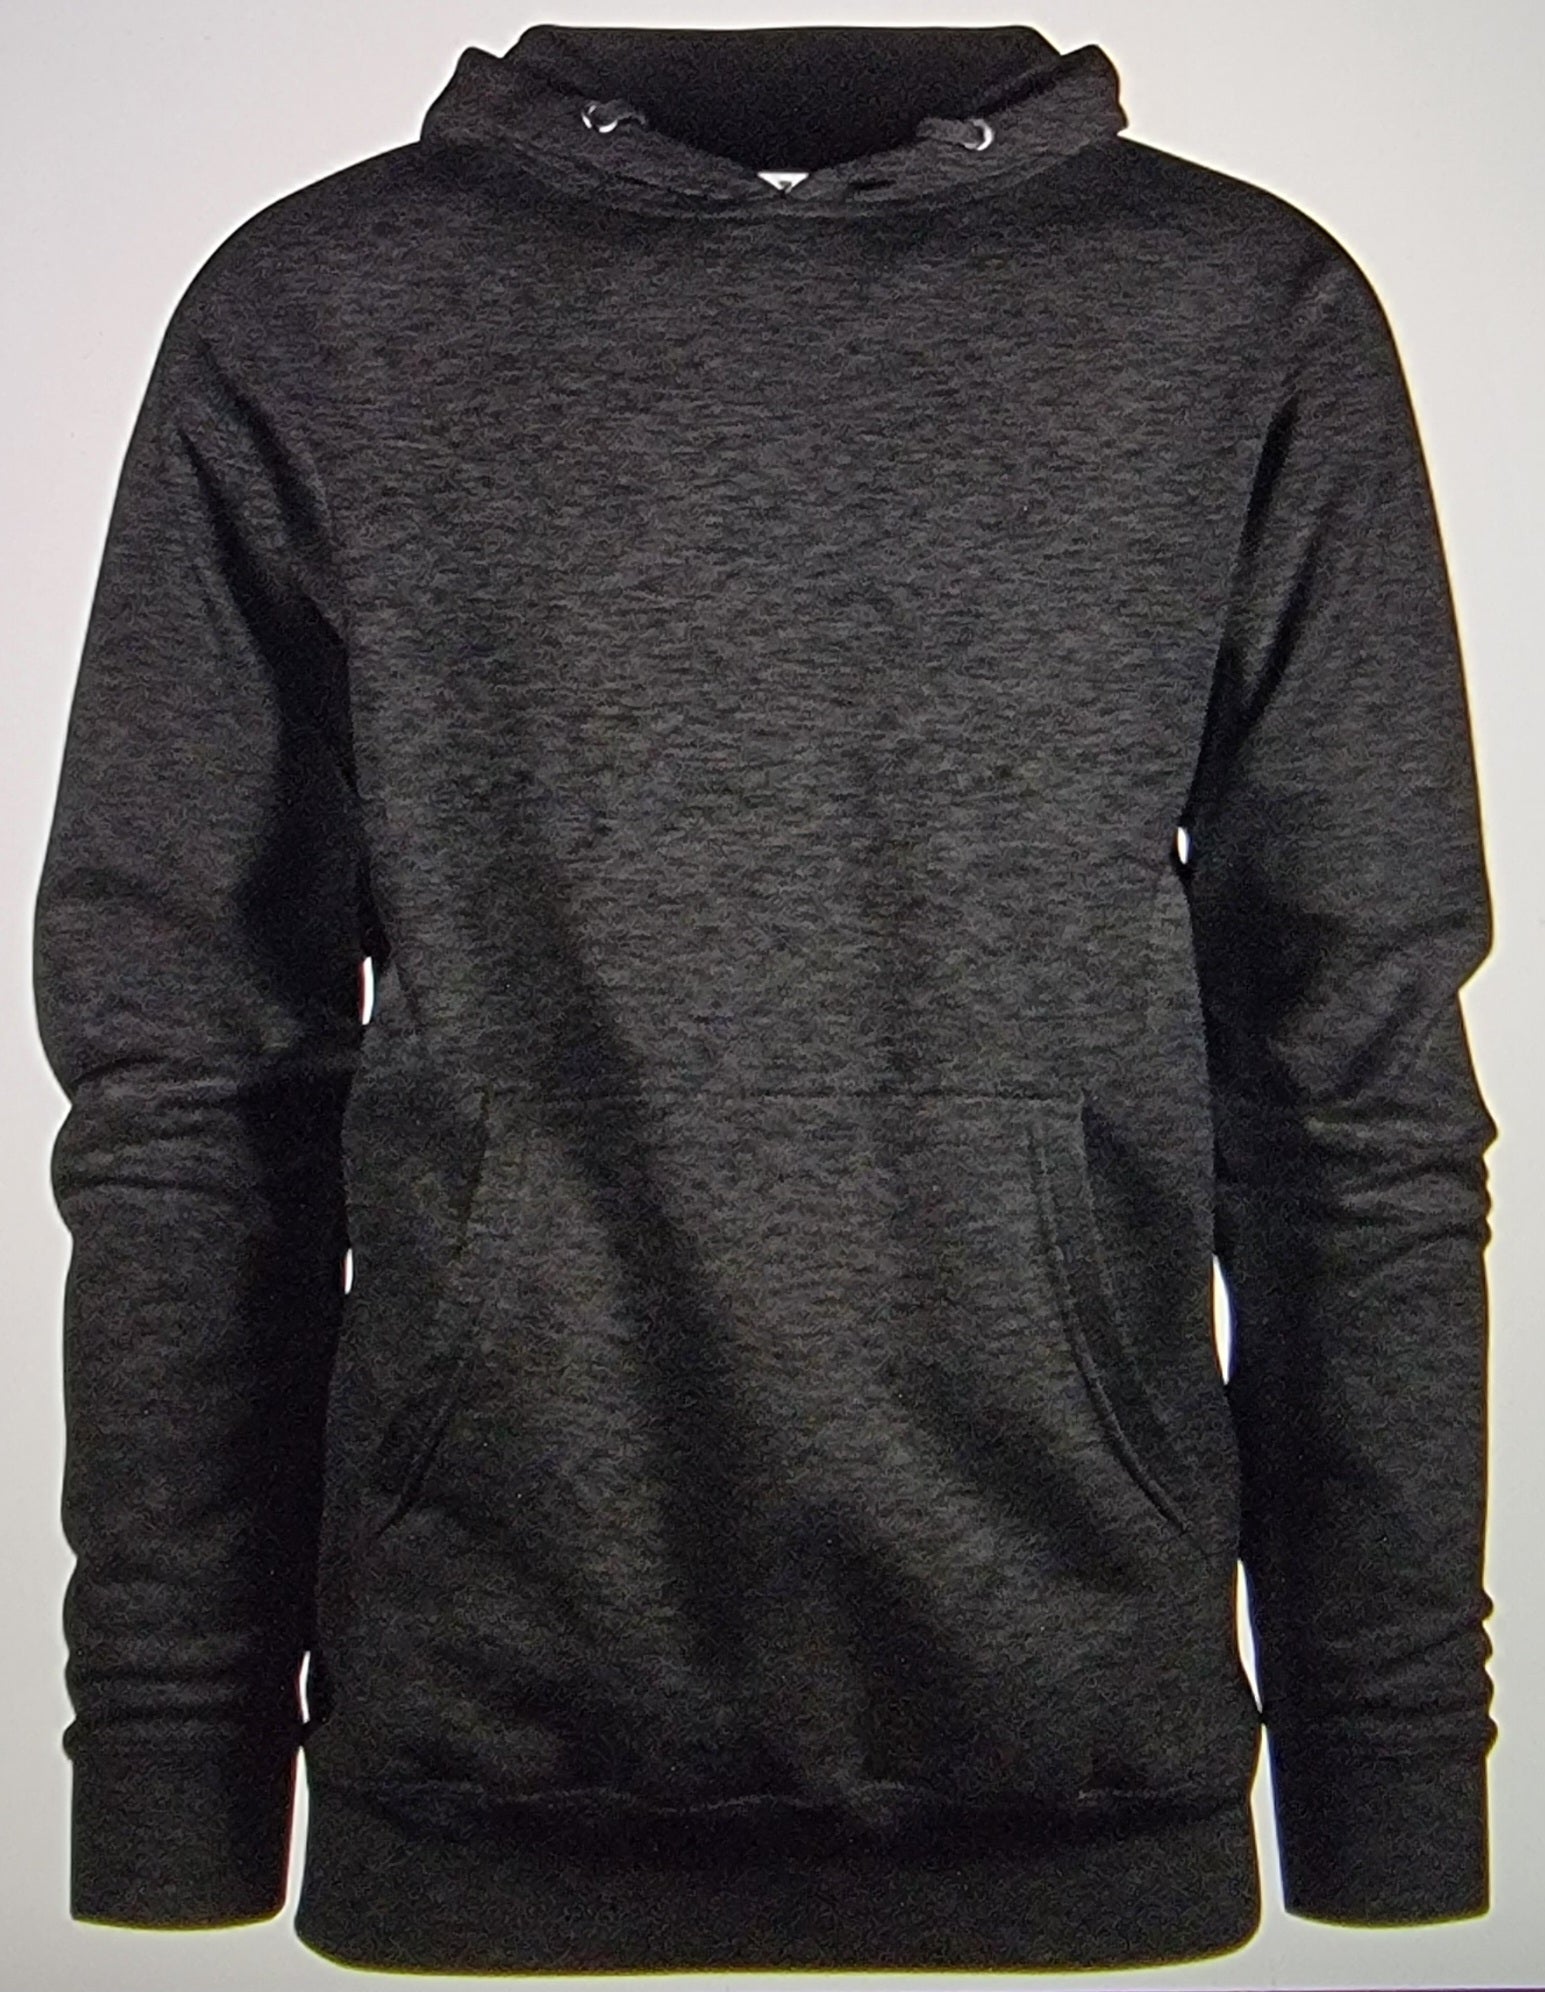 2 Crown Sweater pull over long sleeve